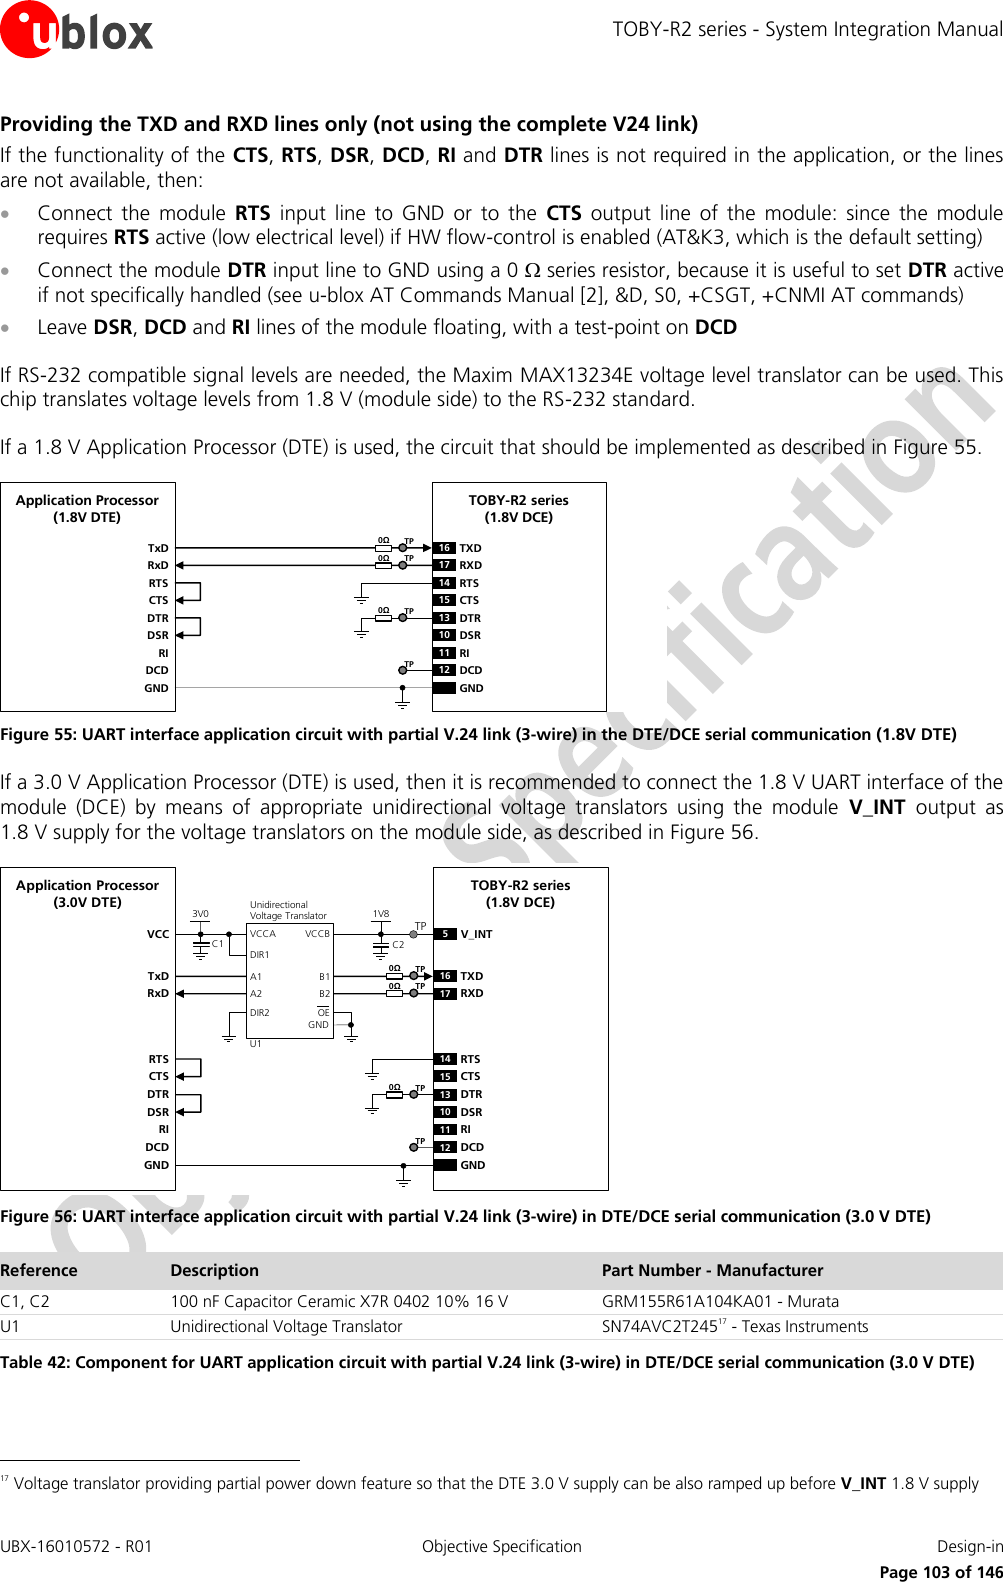 TOBY-R2 series - System Integration Manual UBX-16010572 - R01  Objective Specification  Design-in     Page 103 of 146 Providing the TXD and RXD lines only (not using the complete V24 link) If the functionality of the CTS, RTS, DSR, DCD, RI and DTR lines is not required in the application, or the lines are not available, then:  Connect  the  module  RTS  input  line  to  GND  or  to  the  CTS  output  line  of  the  module:  since  the  module requires RTS active (low electrical level) if HW flow-control is enabled (AT&amp;K3, which is the default setting)  Connect the module DTR input line to GND using a 0  series resistor, because it is useful to set DTR active if not specifically handled (see u-blox AT Commands Manual [2], &amp;D, S0, +CSGT, +CNMI AT commands)  Leave DSR, DCD and RI lines of the module floating, with a test-point on DCD  If RS-232 compatible signal levels are needed, the Maxim MAX13234E voltage level translator can be used. This chip translates voltage levels from 1.8 V (module side) to the RS-232 standard.   If a 1.8 V Application Processor (DTE) is used, the circuit that should be implemented as described in Figure 55. TxDApplication Processor(1.8V DTE)RxDRTSCTSDTRDSRRIDCDGNDTOBY-R2 series (1.8V DCE)16 TXD13 DTR17 RXD14 RTS15 CTS10 DSR11 RI12 DCDGND0ΩTP0ΩTP0ΩTPTP Figure 55: UART interface application circuit with partial V.24 link (3-wire) in the DTE/DCE serial communication (1.8V DTE) If a 3.0 V Application Processor (DTE) is used, then it is recommended to connect the 1.8 V UART interface of the module  (DCE)  by  means  of  appropriate  unidirectional  voltage  translators  using  the  module  V_INT  output  as 1.8 V supply for the voltage translators on the module side, as described in Figure 56. 5V_INTTxDApplication Processor(3.0V DTE)RxDDTRDSRRIDCDGNDTOBY-R2 series (1.8V DCE)16 TXD13 DTR17 RXD10 DSR11 RI12 DCDGND1V8B1 A1GNDU1VCCBVCCAUnidirectionalVoltage TranslatorC1 C23V0DIR1DIR2 OEVCCB2 A2RTSCTS14 RTS15 CTSTP0ΩTP0ΩTP0ΩTPTP Figure 56: UART interface application circuit with partial V.24 link (3-wire) in DTE/DCE serial communication (3.0 V DTE) Reference Description Part Number - Manufacturer C1, C2 100 nF Capacitor Ceramic X7R 0402 10% 16 V GRM155R61A104KA01 - Murata U1 Unidirectional Voltage Translator SN74AVC2T24517 - Texas Instruments Table 42: Component for UART application circuit with partial V.24 link (3-wire) in DTE/DCE serial communication (3.0 V DTE)                                                       17 Voltage translator providing partial power down feature so that the DTE 3.0 V supply can be also ramped up before V_INT 1.8 V supply 